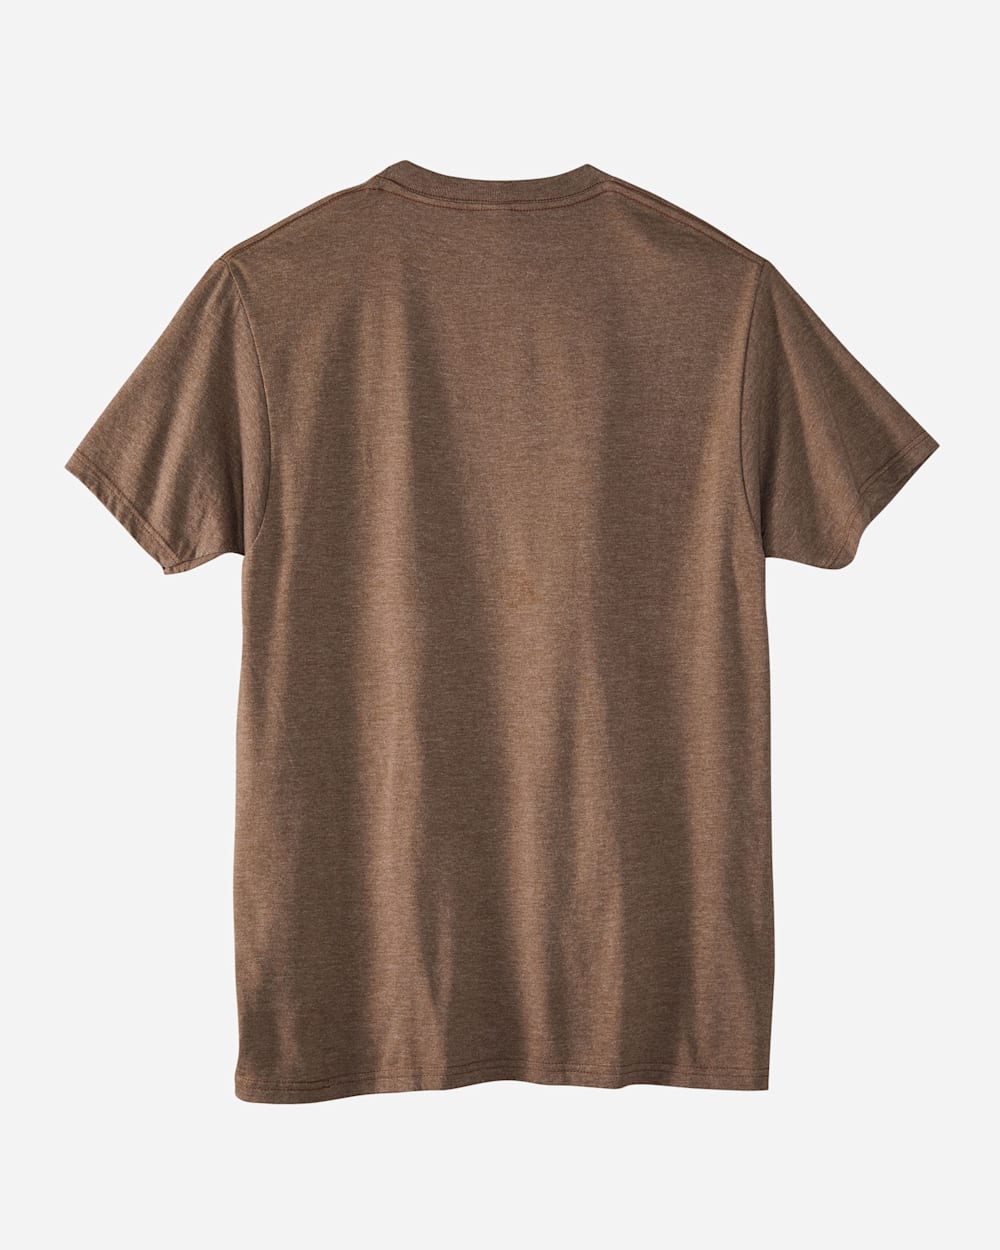 ALTERNATE VIEW OF MEN'S GRAND CANYON PARK HERITAGE TEE IN BROWN HEATHER image number 2